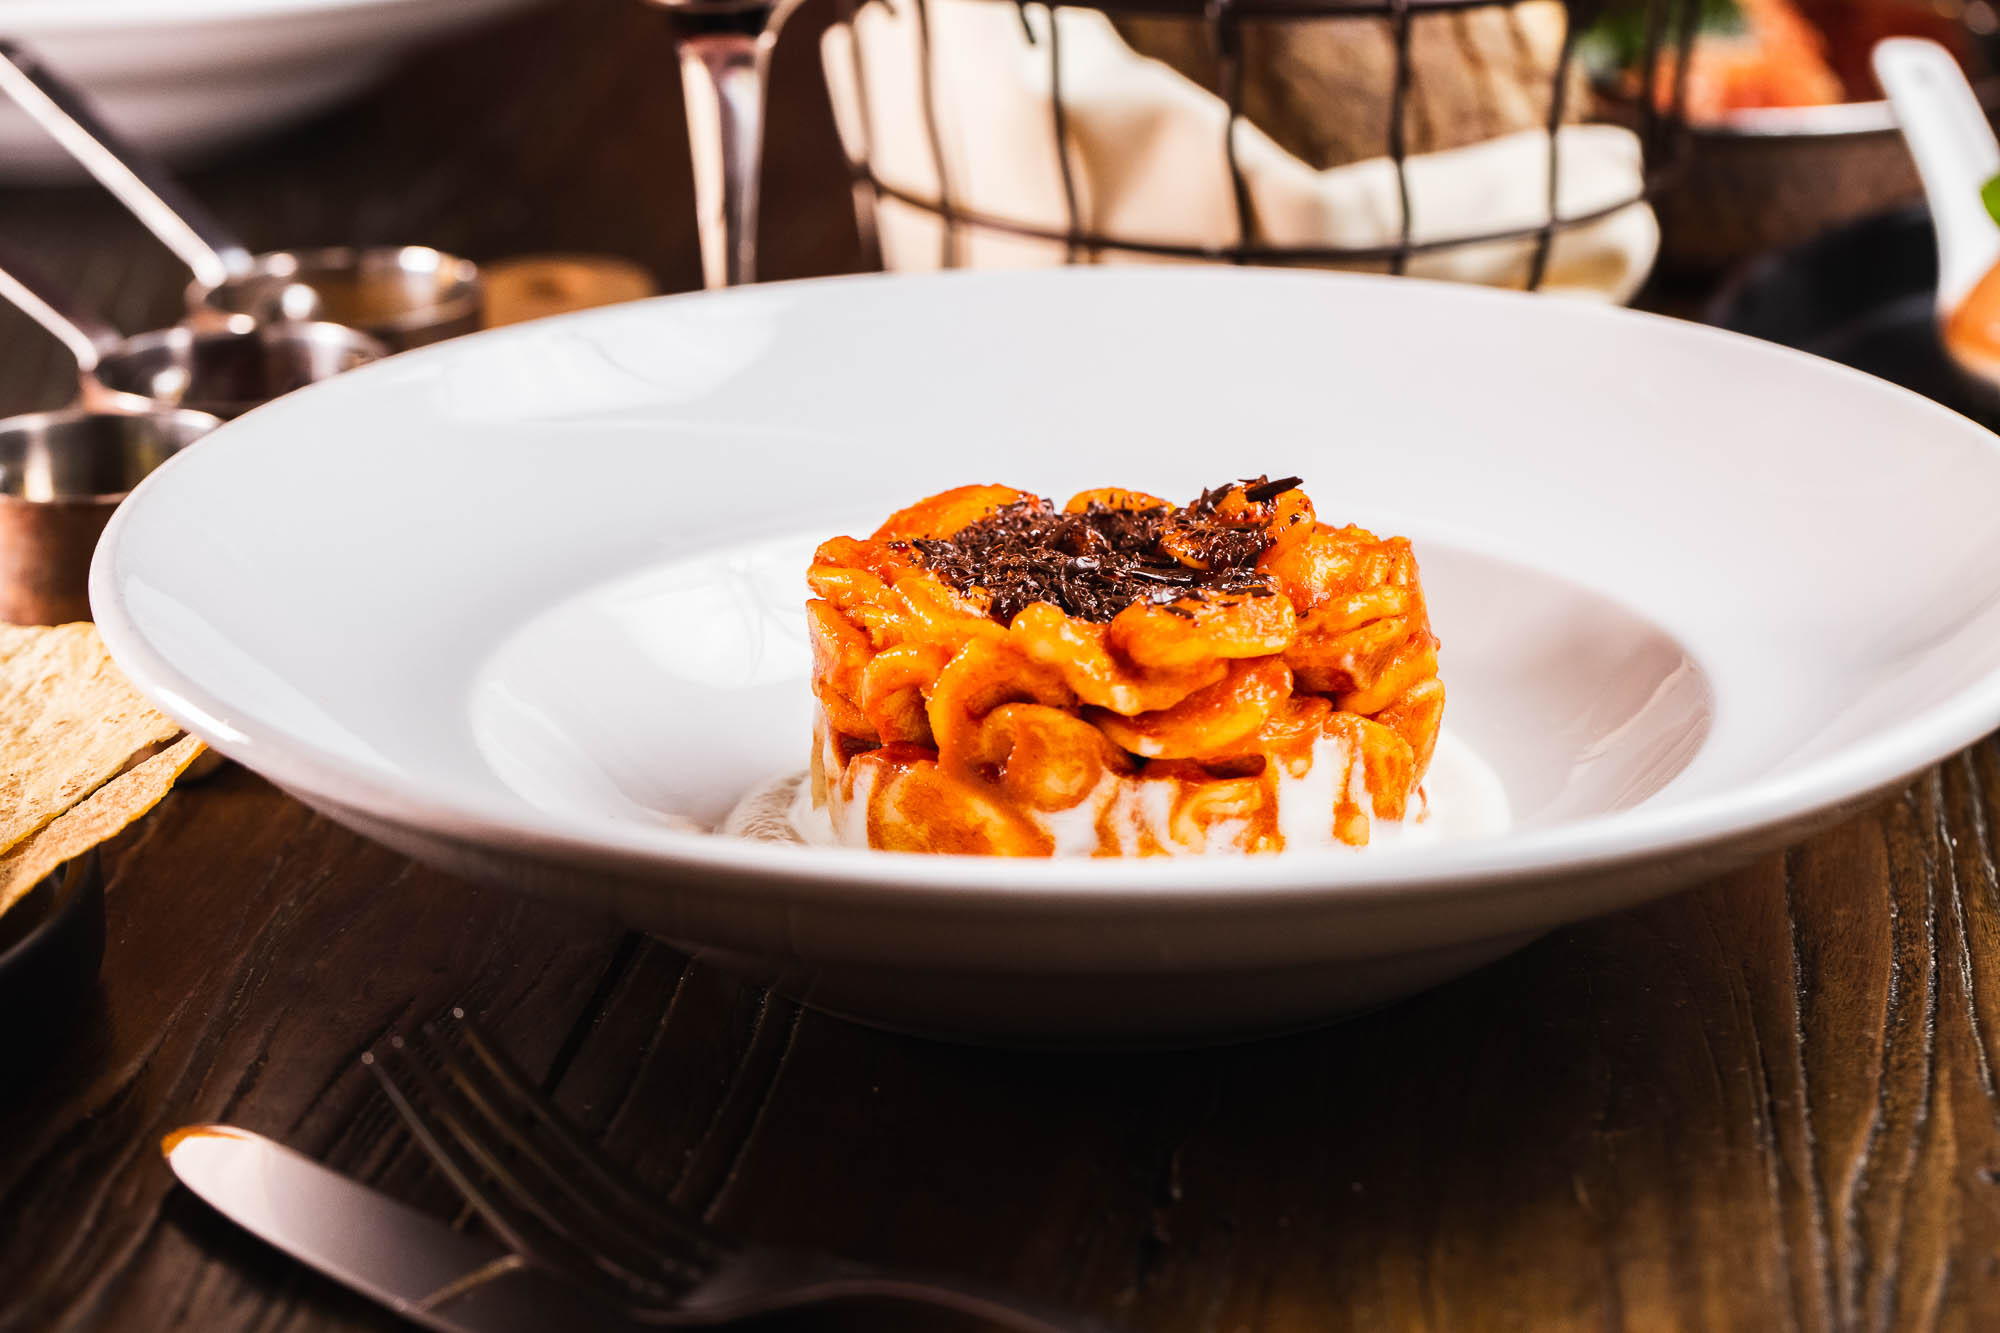 Orecchiette pasta with a spicy  'nduja sausage, cauliflower puree, and shaved chocolate